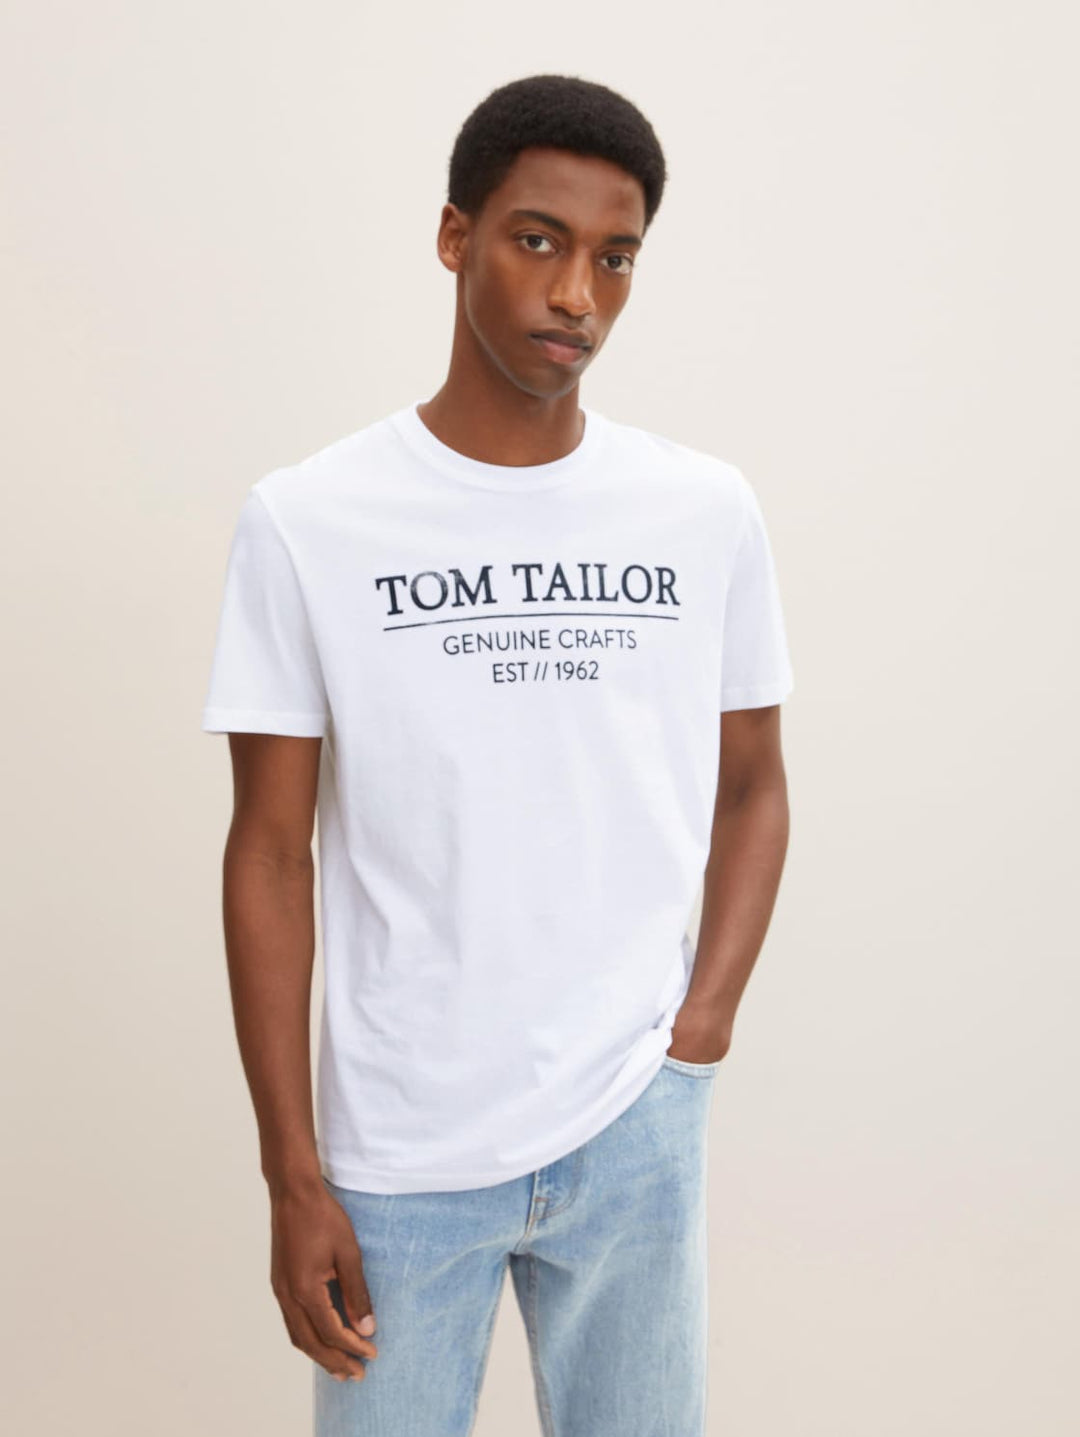 Tom Tailor Tagged Non-Sale Square Deal Collection – \